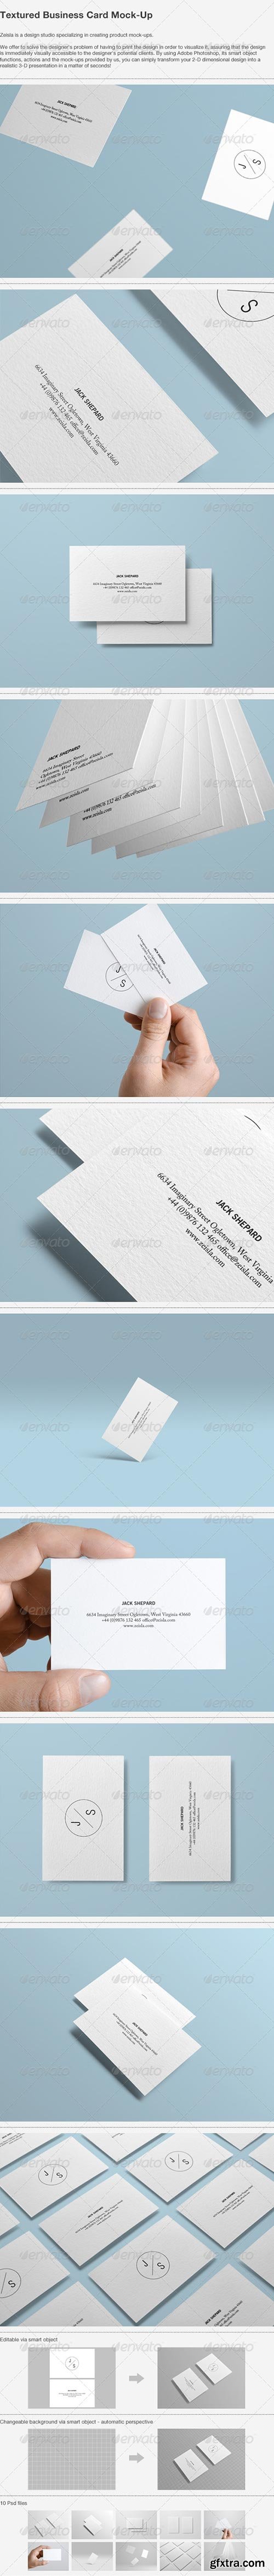 GraphicRiver - Textured Business Card Mock-up 4481265